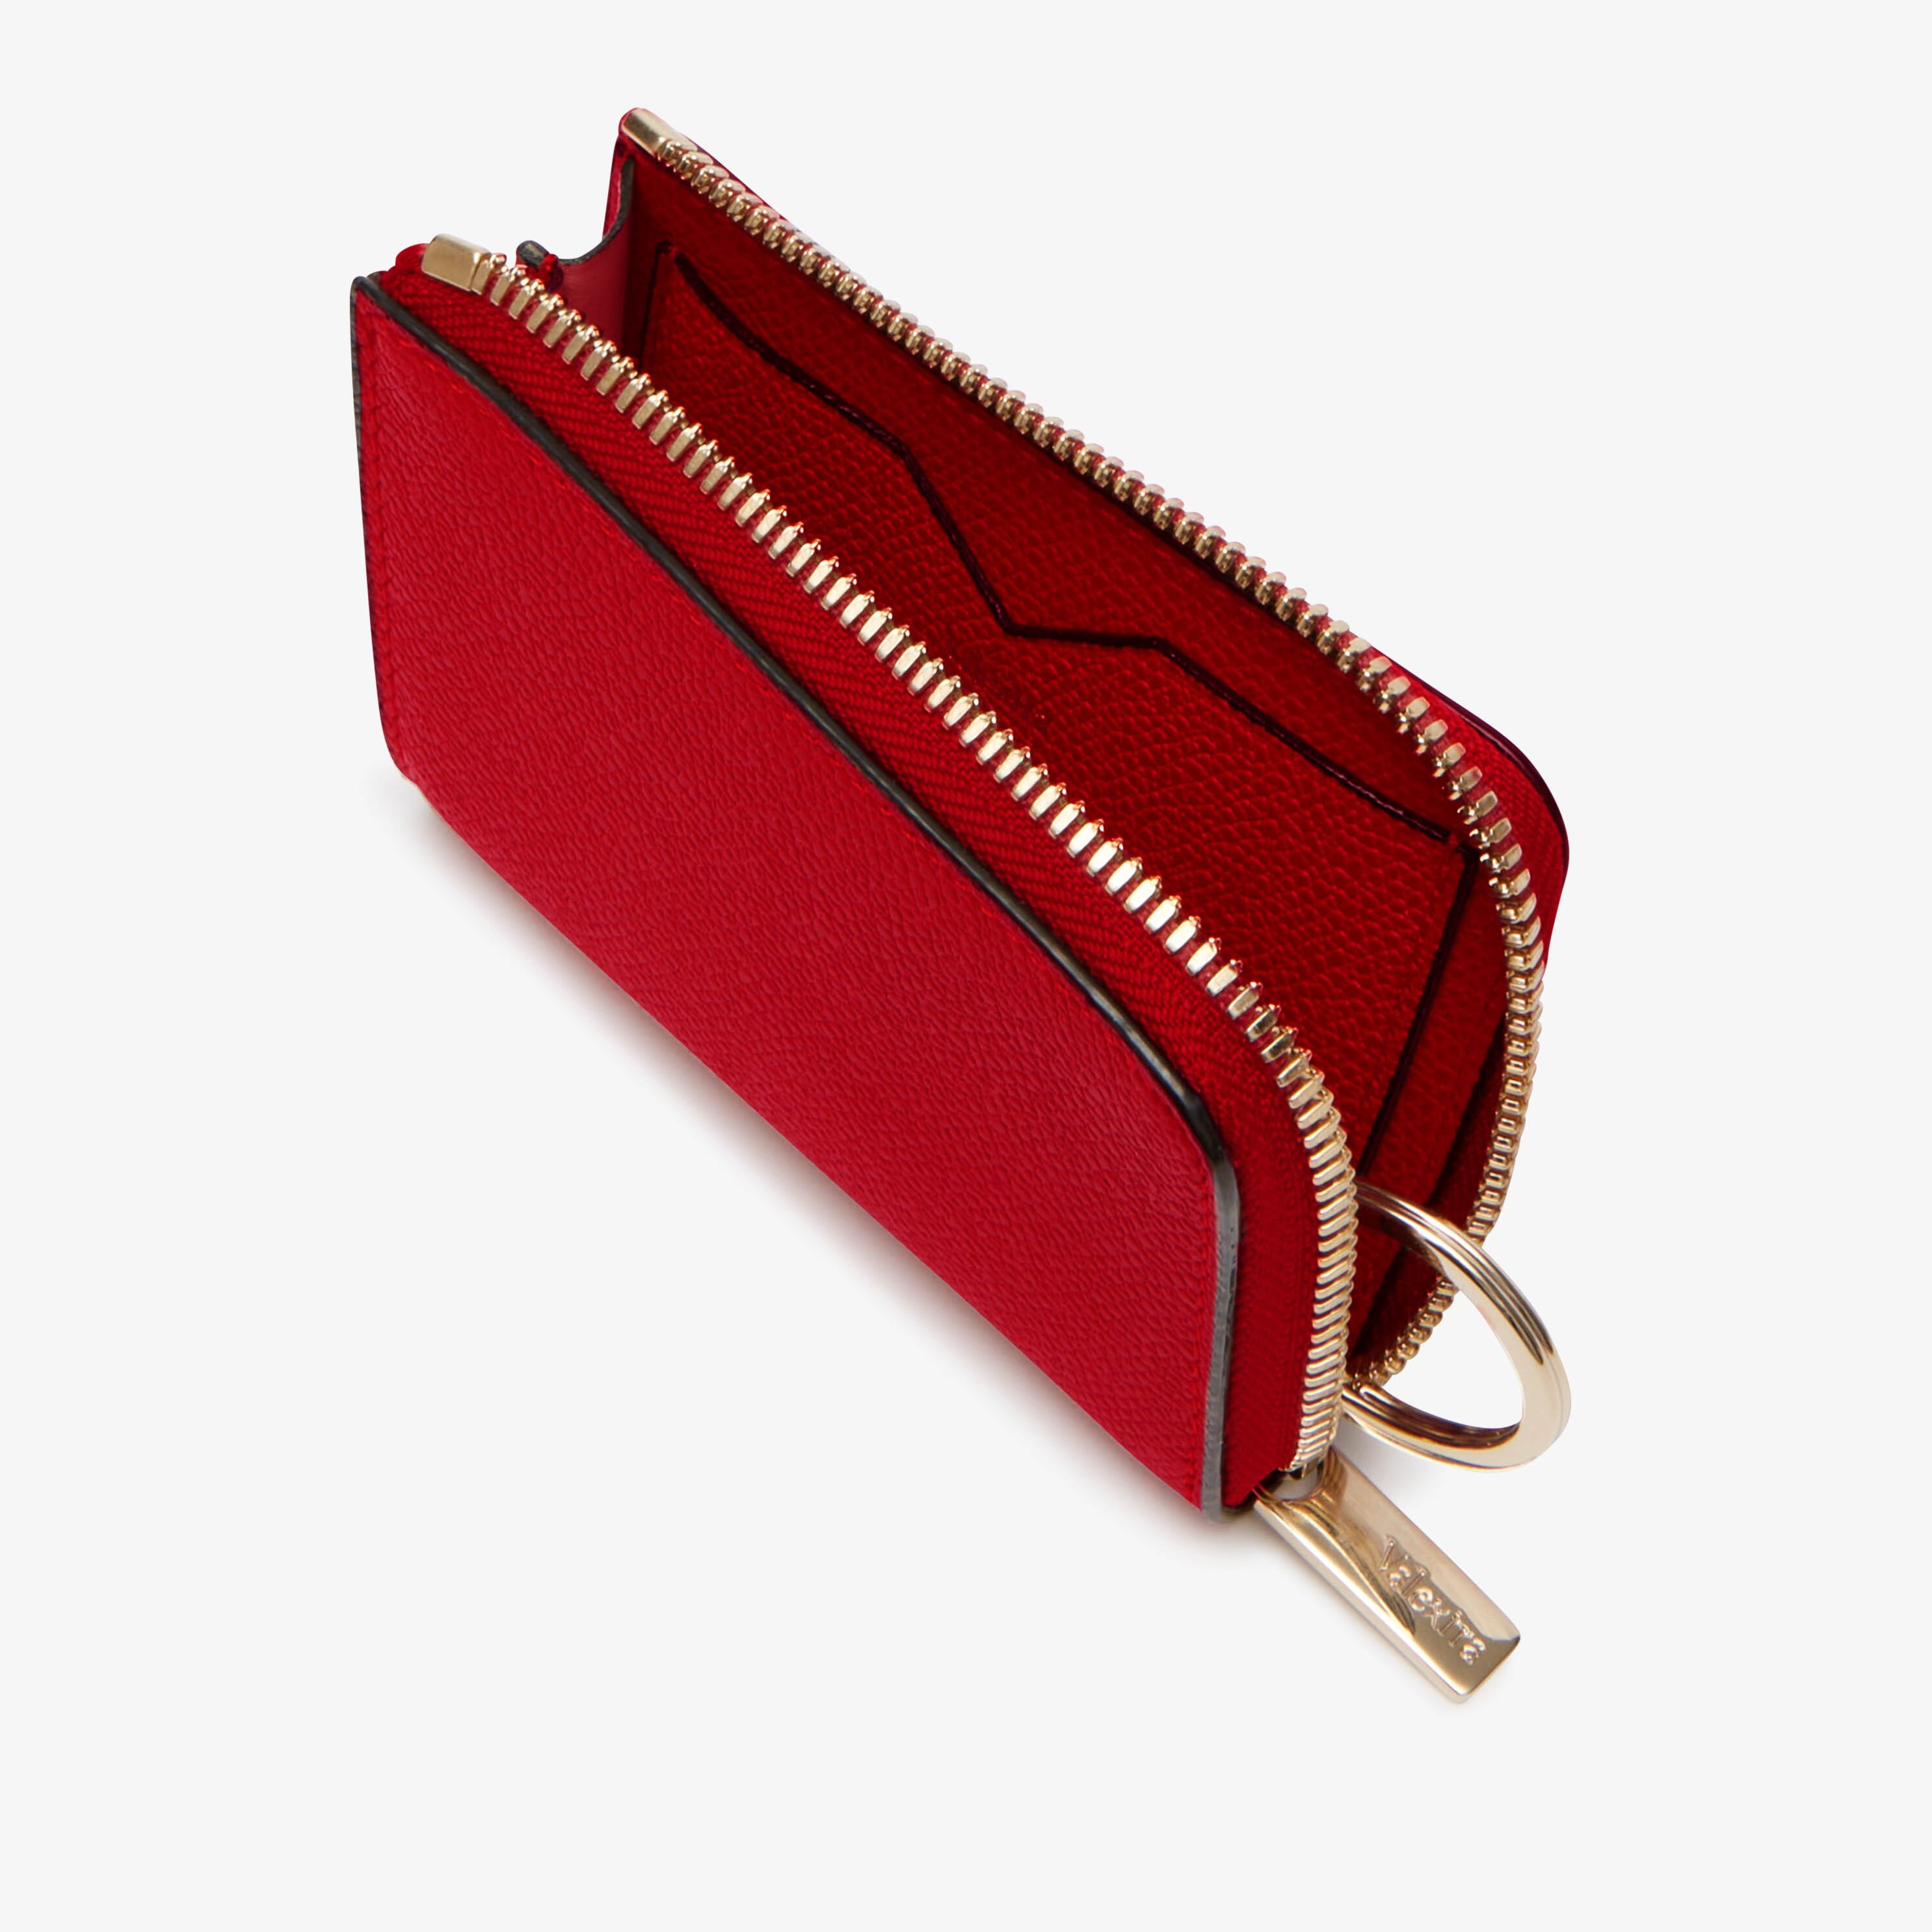 Leather Key Case With Zip, Red, Key Wallet